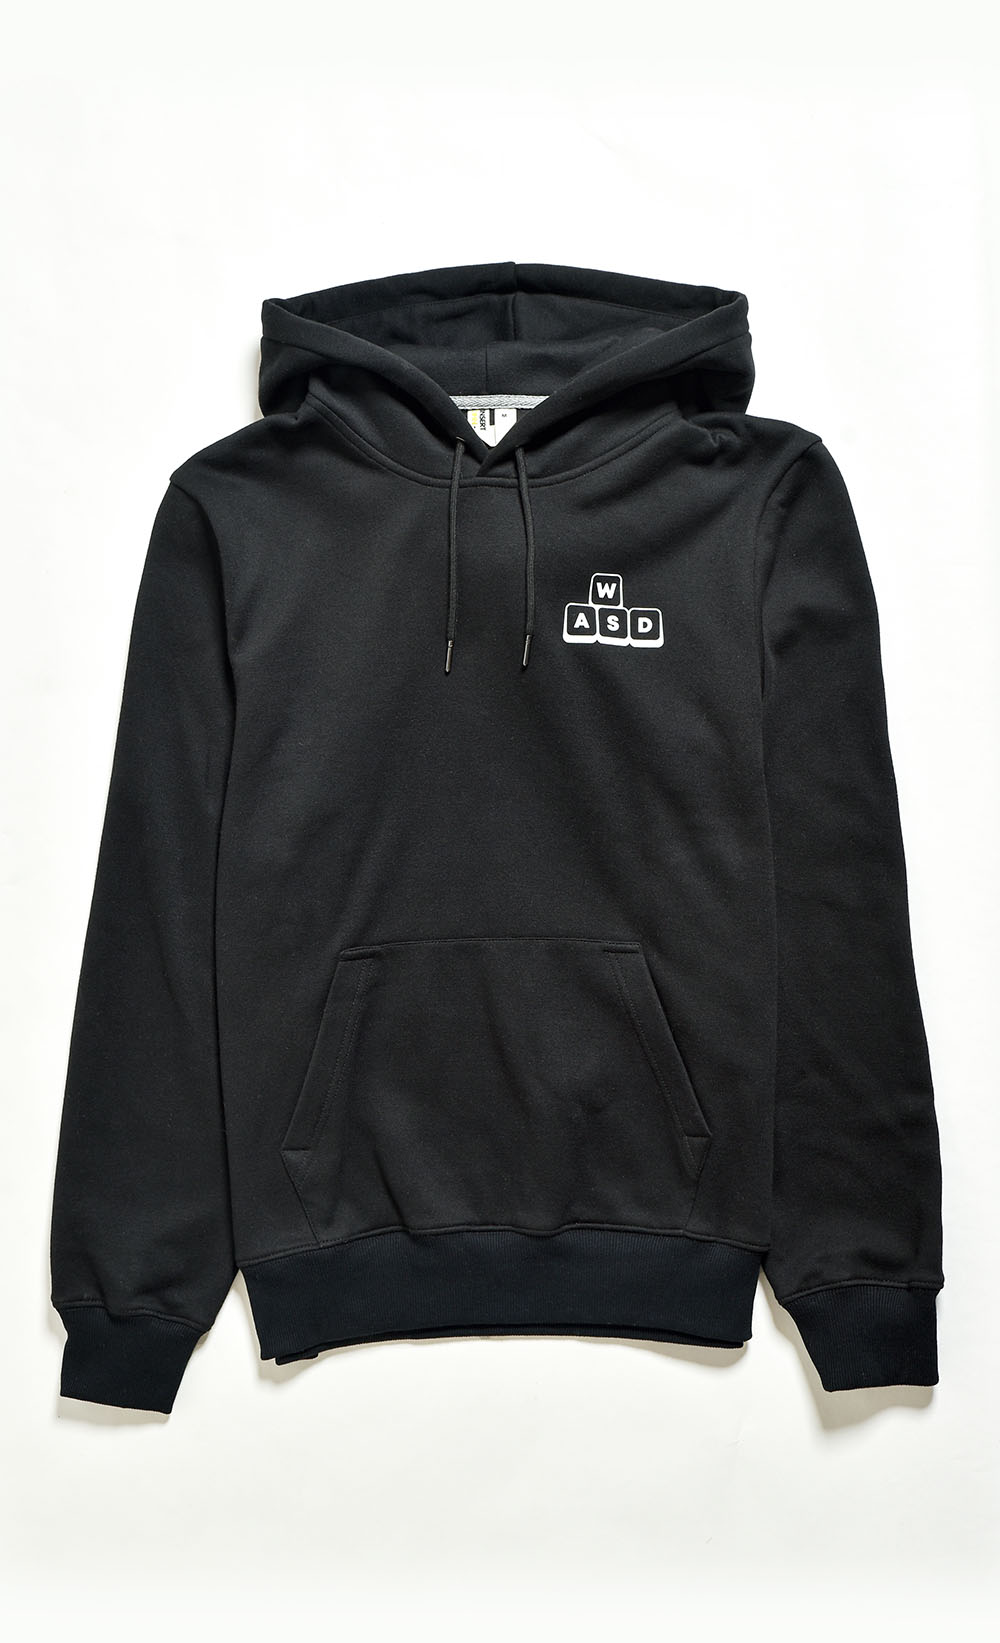 WASD Hoodie - Insert Coin Clothing